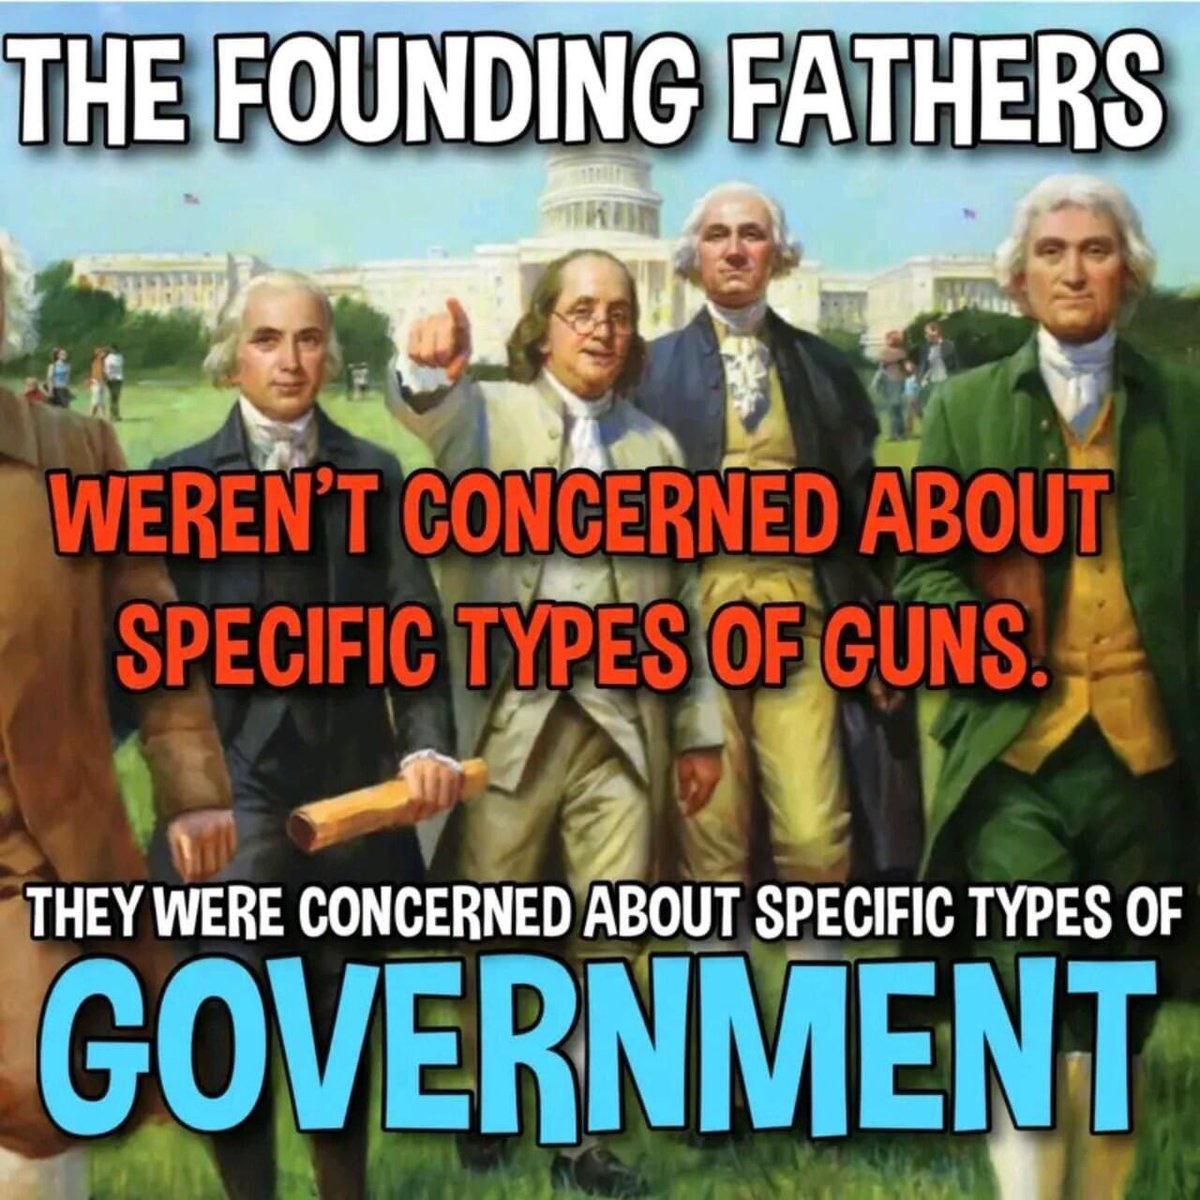 The founding fathers weren't concerned about specific types of guns. They were concerned about specific types of government.